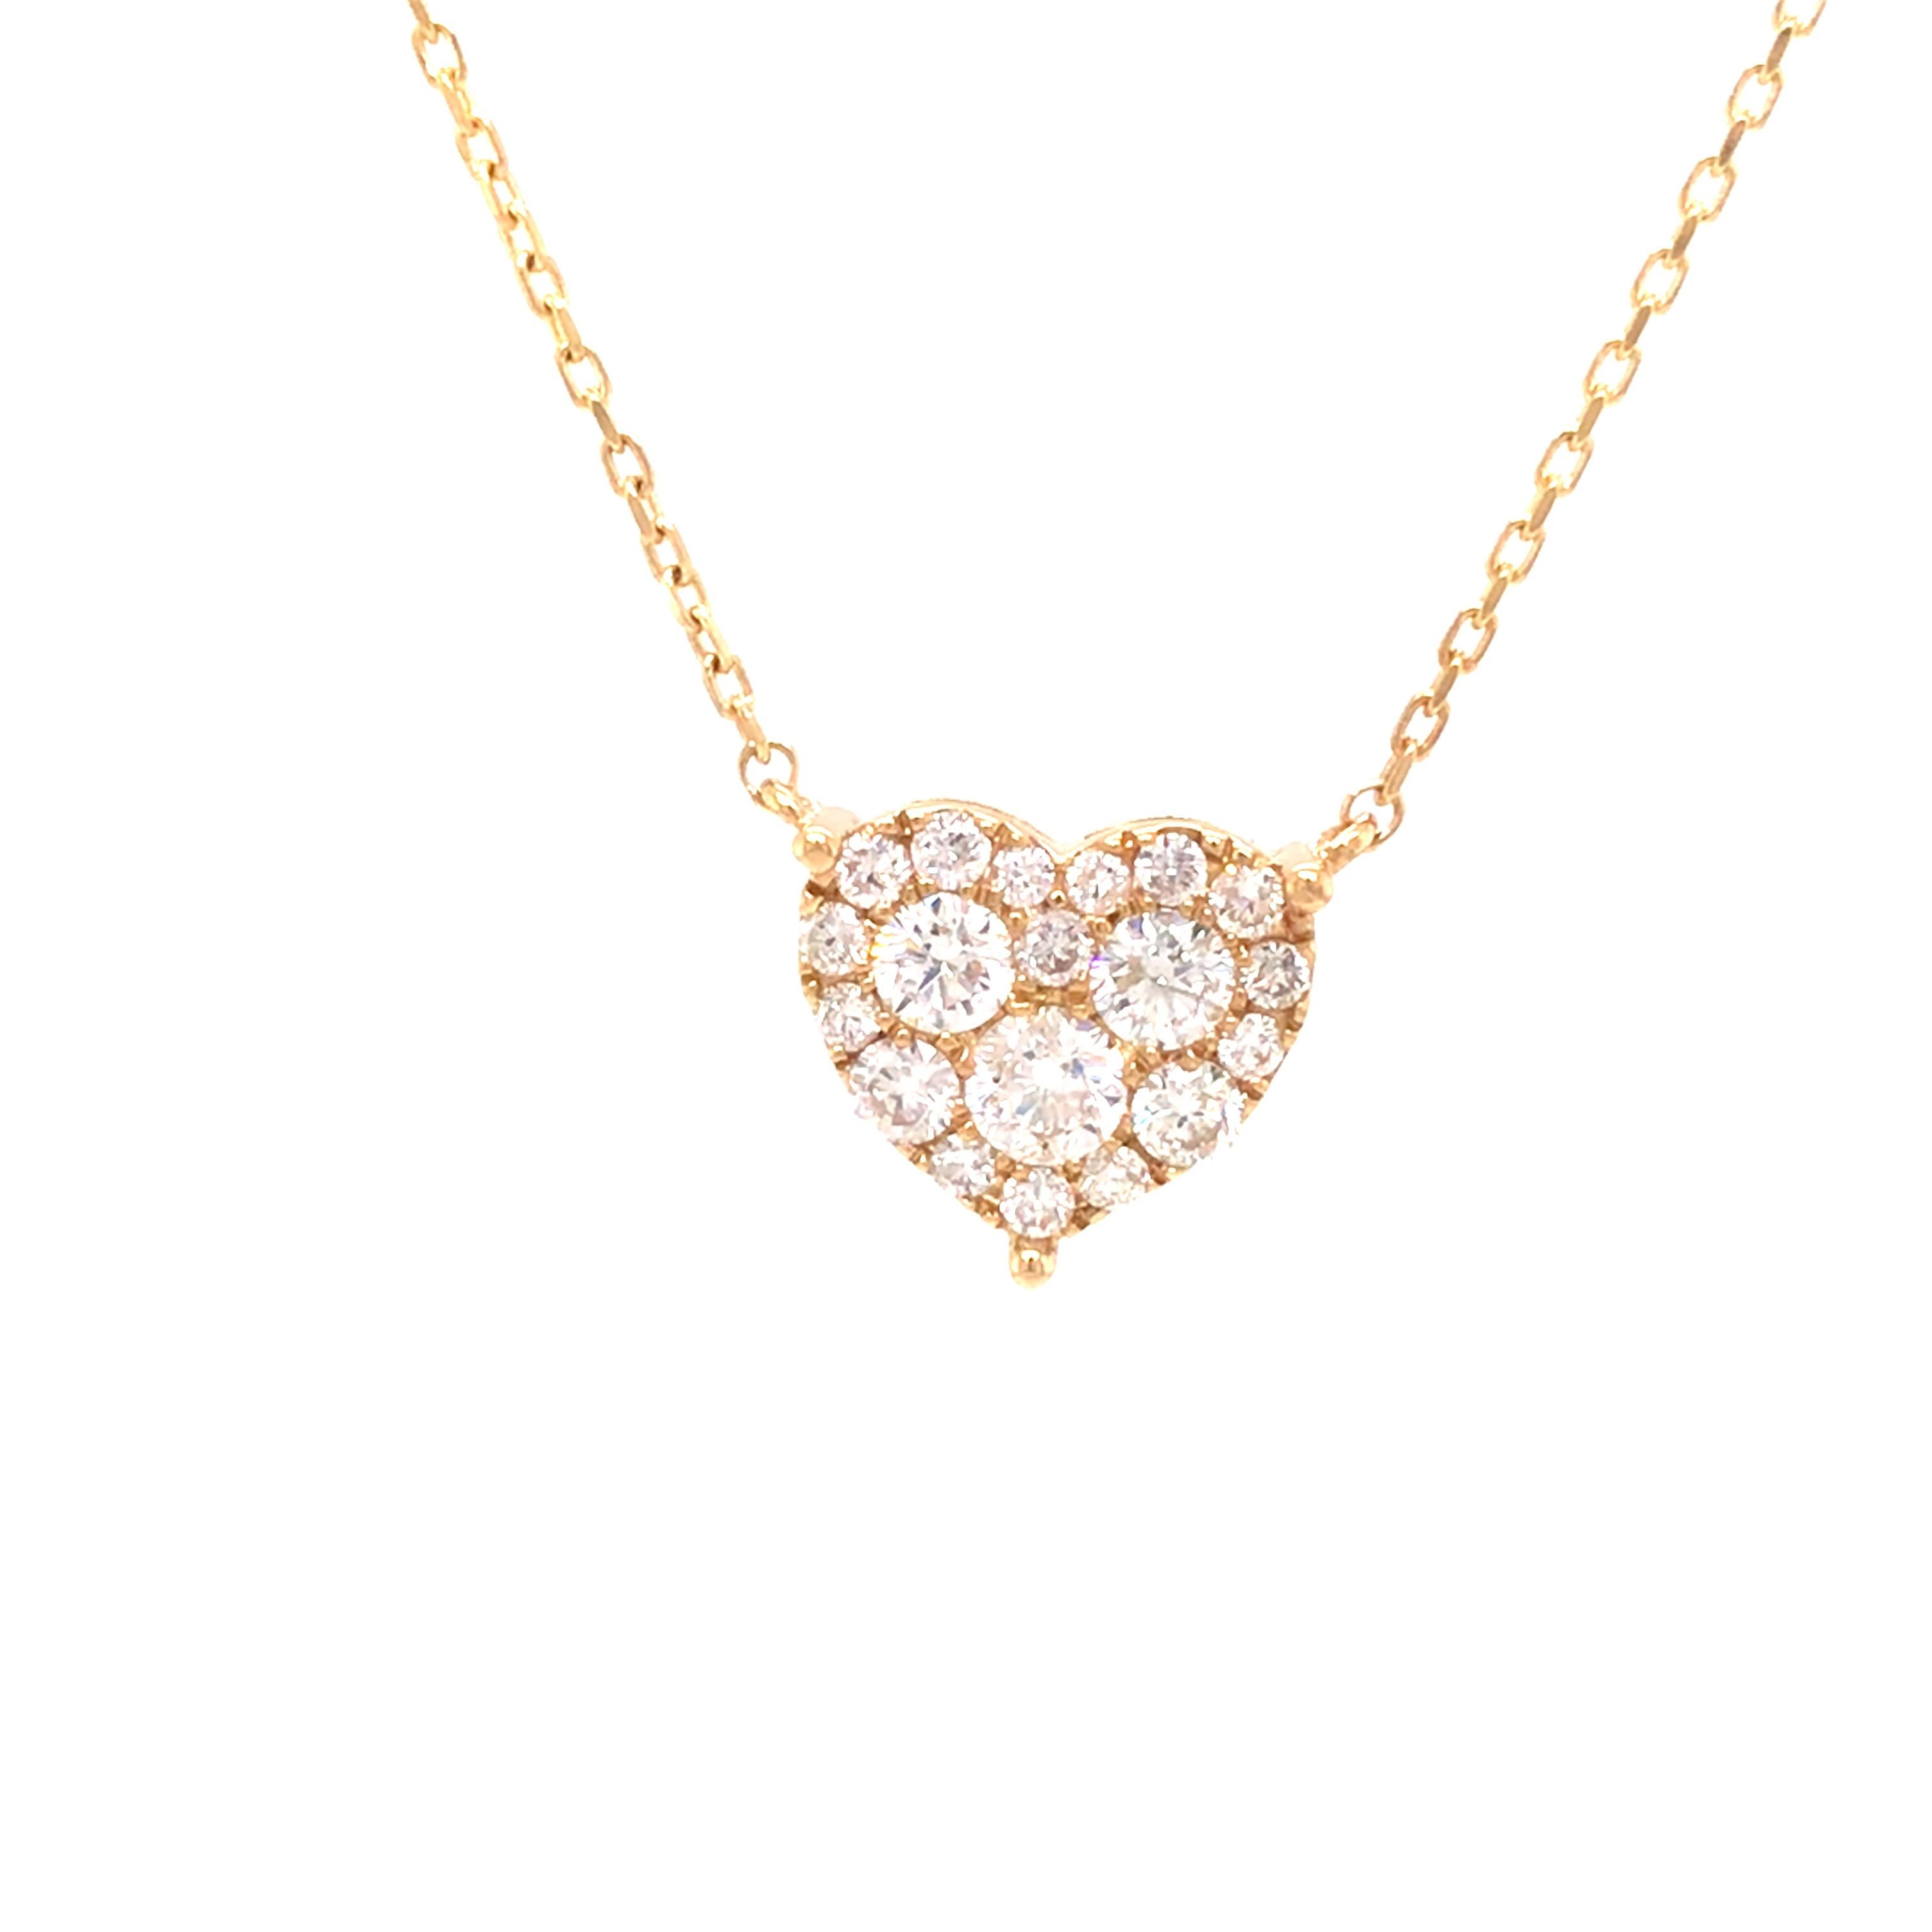 Diamond Pave Heart Necklace in 18K Yellow Gold.  (19) Round Brilliant Cut Diamonds weighing 0.66 carat total weight, G-H in color and VS-SI in clarity are expertly set.  The Necklace measures 16 inch in length. 2.81 grams.